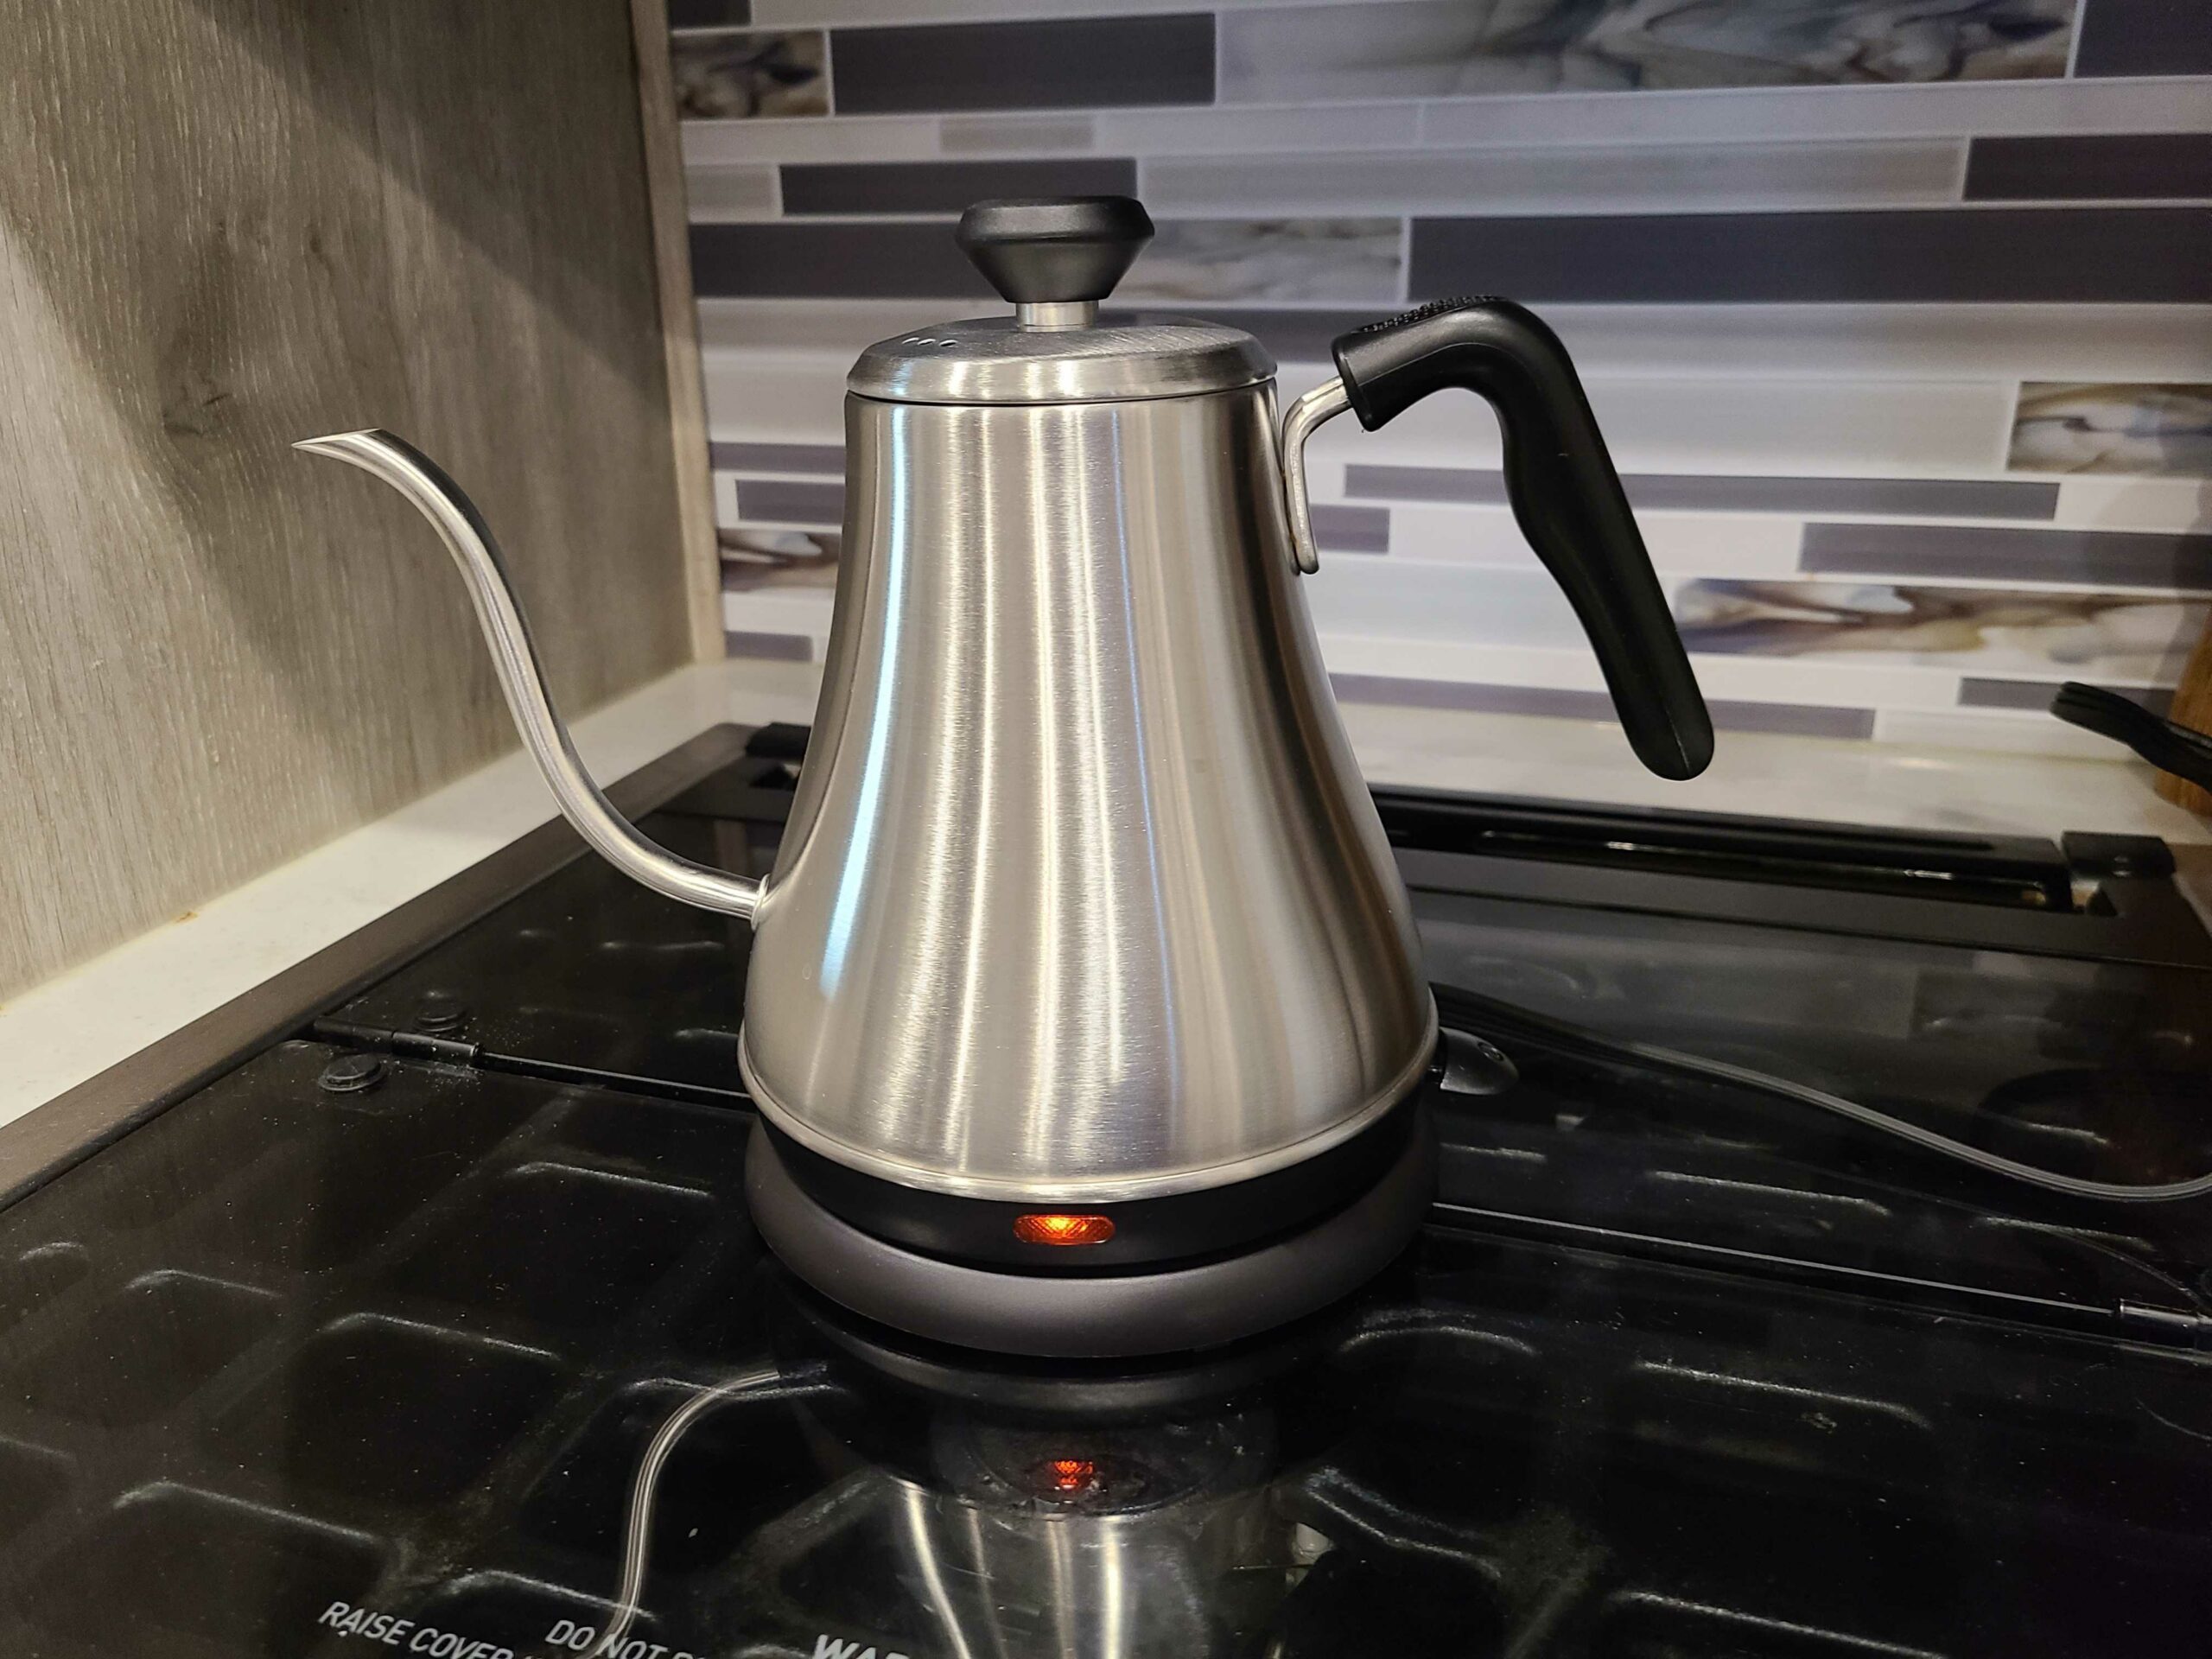 gooseneck stainless steel kettle on stove with indicator light on